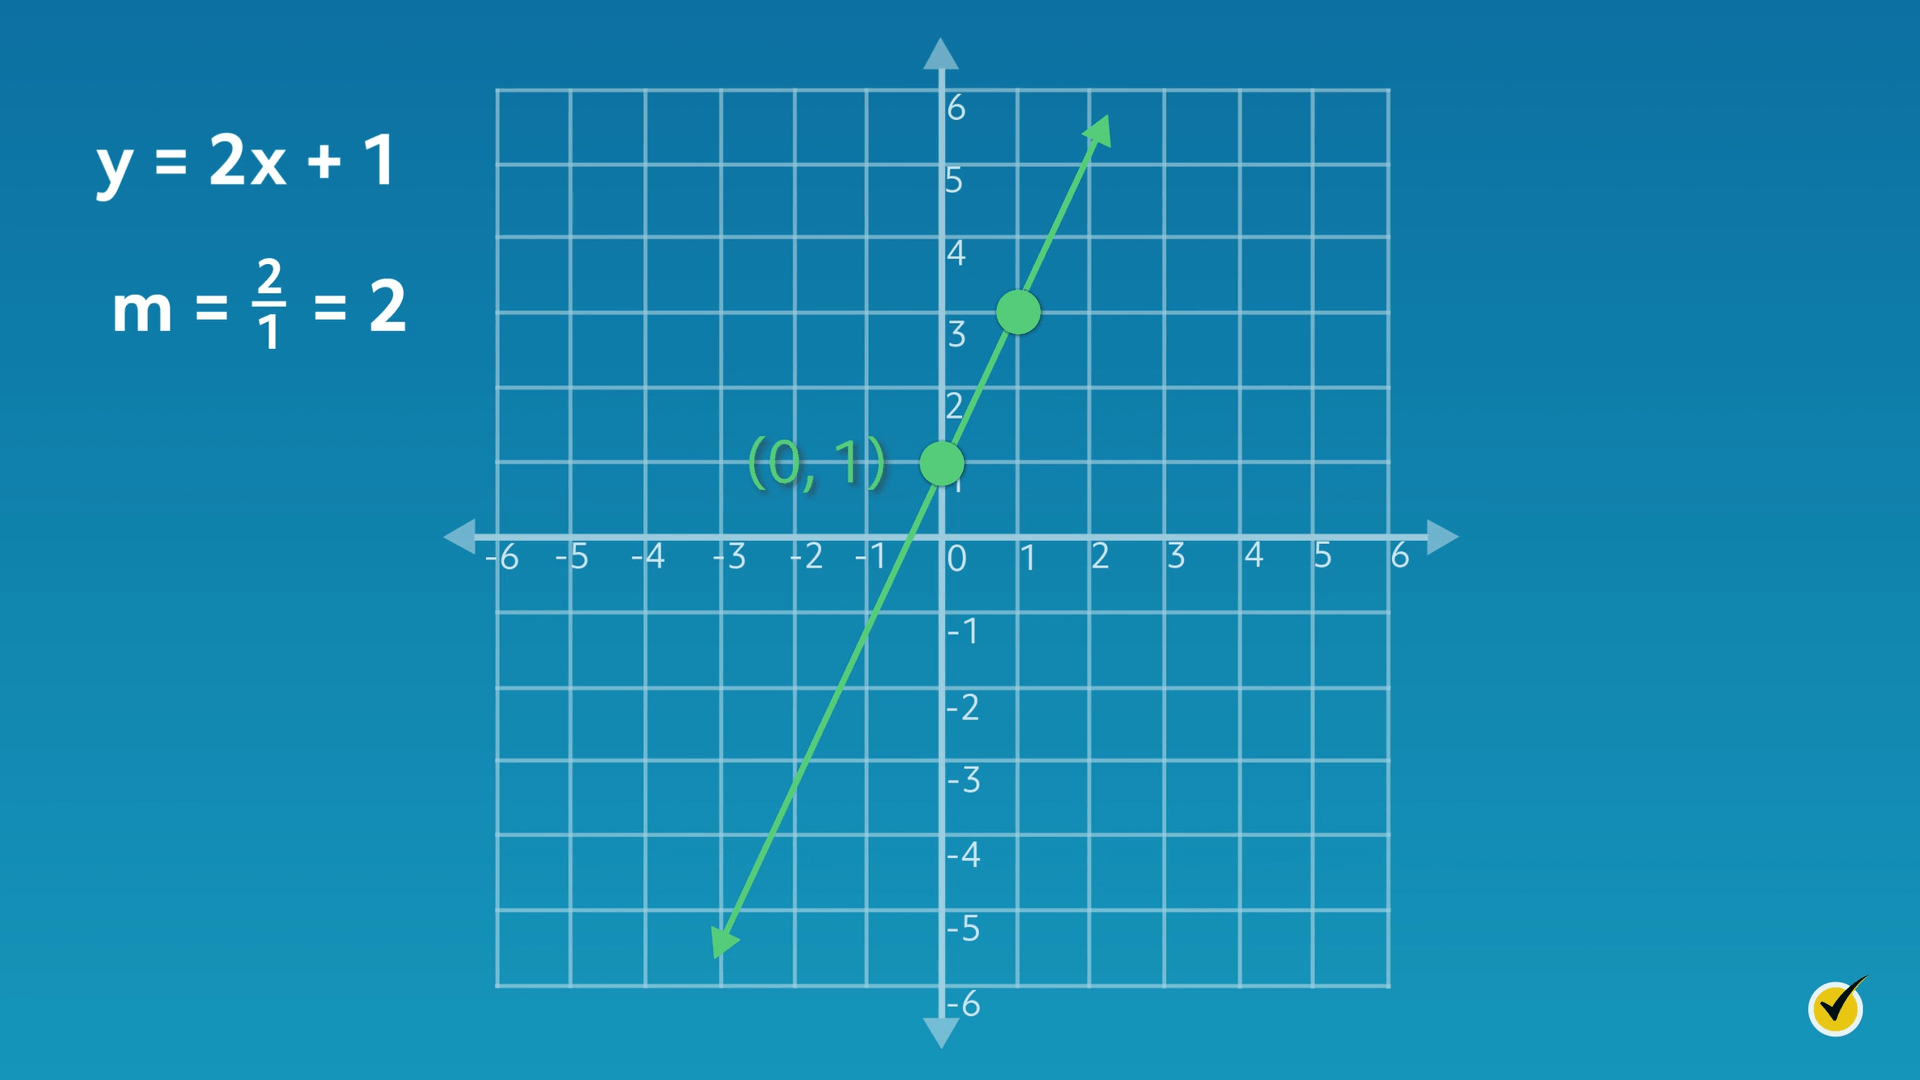 The linear equation y= 2x + 1 graphed.